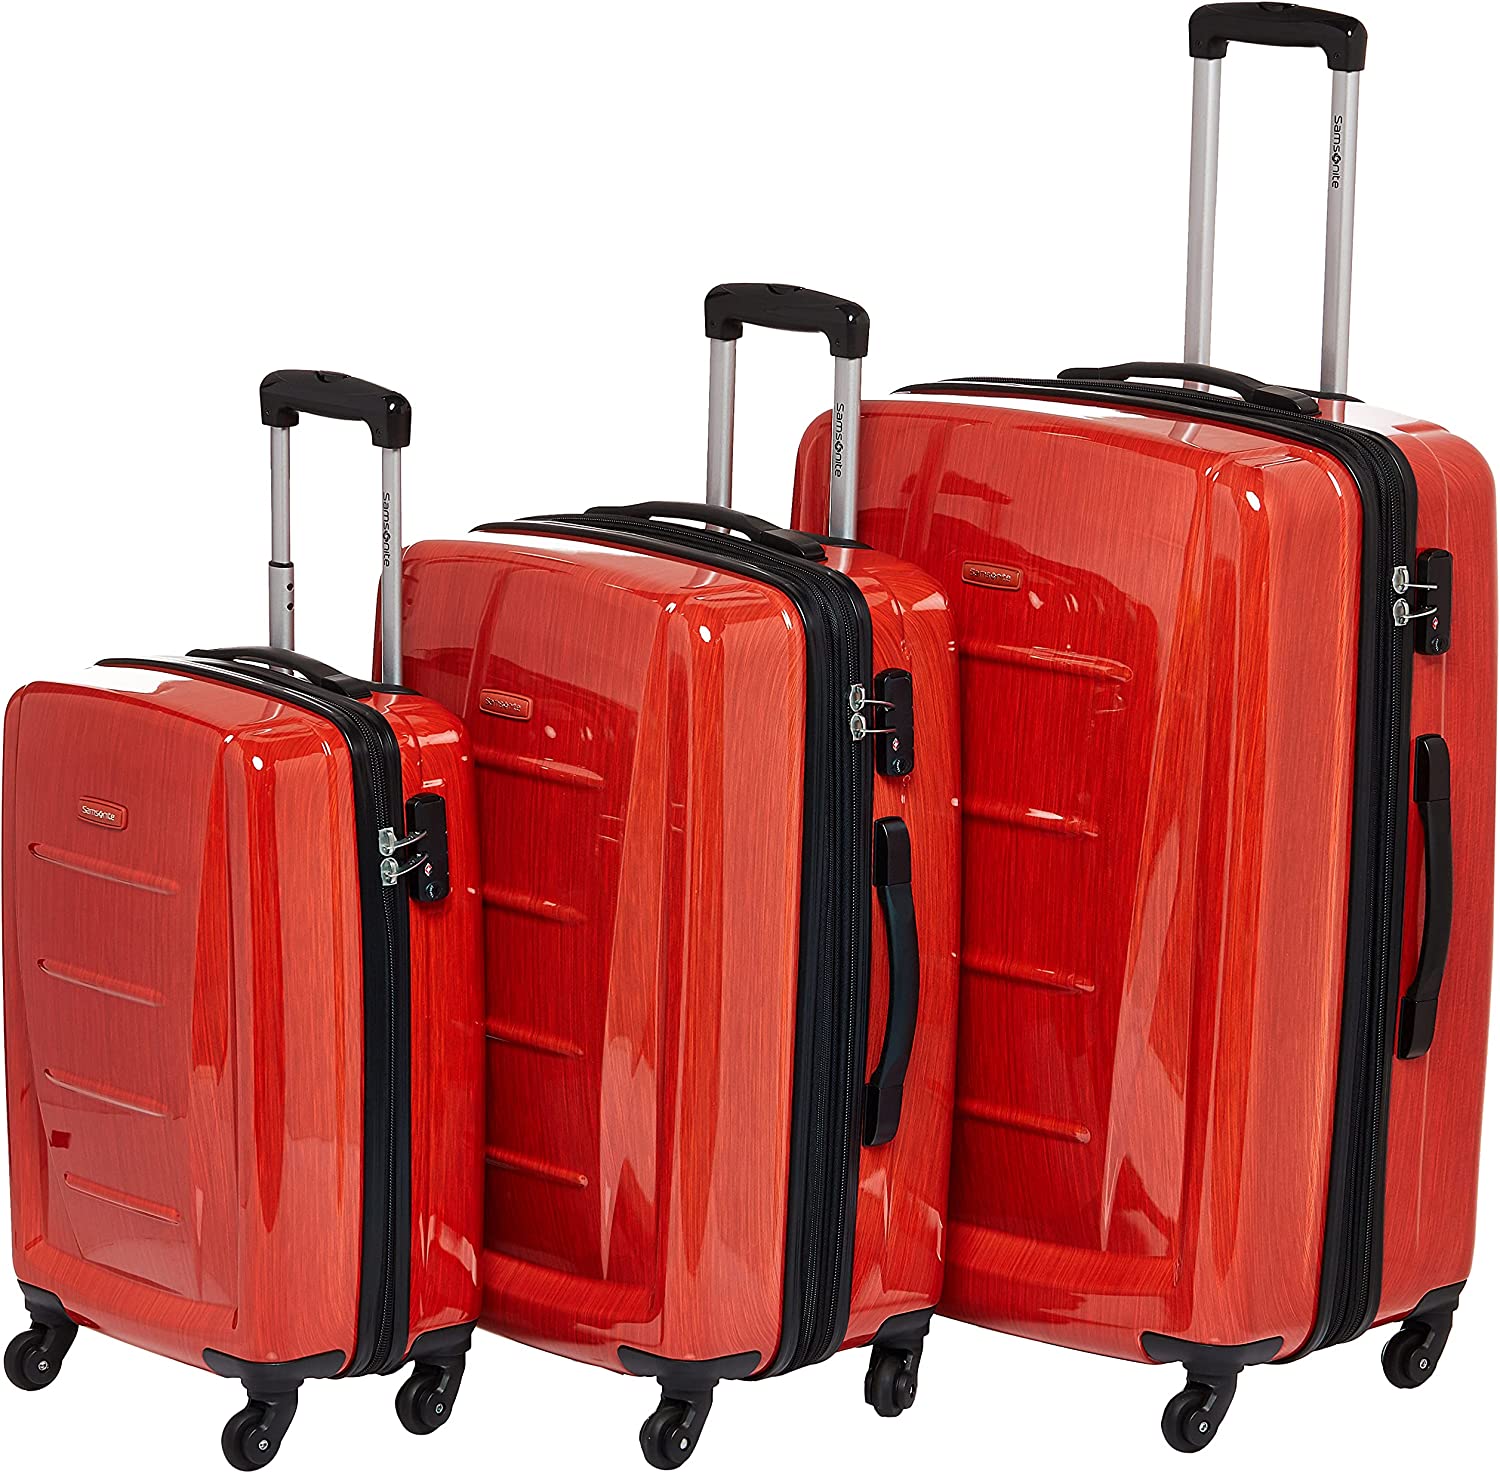 Winfield 2 Hardside Luggage with Spinner Wheels 3-Piece Set-Suitcase clearance